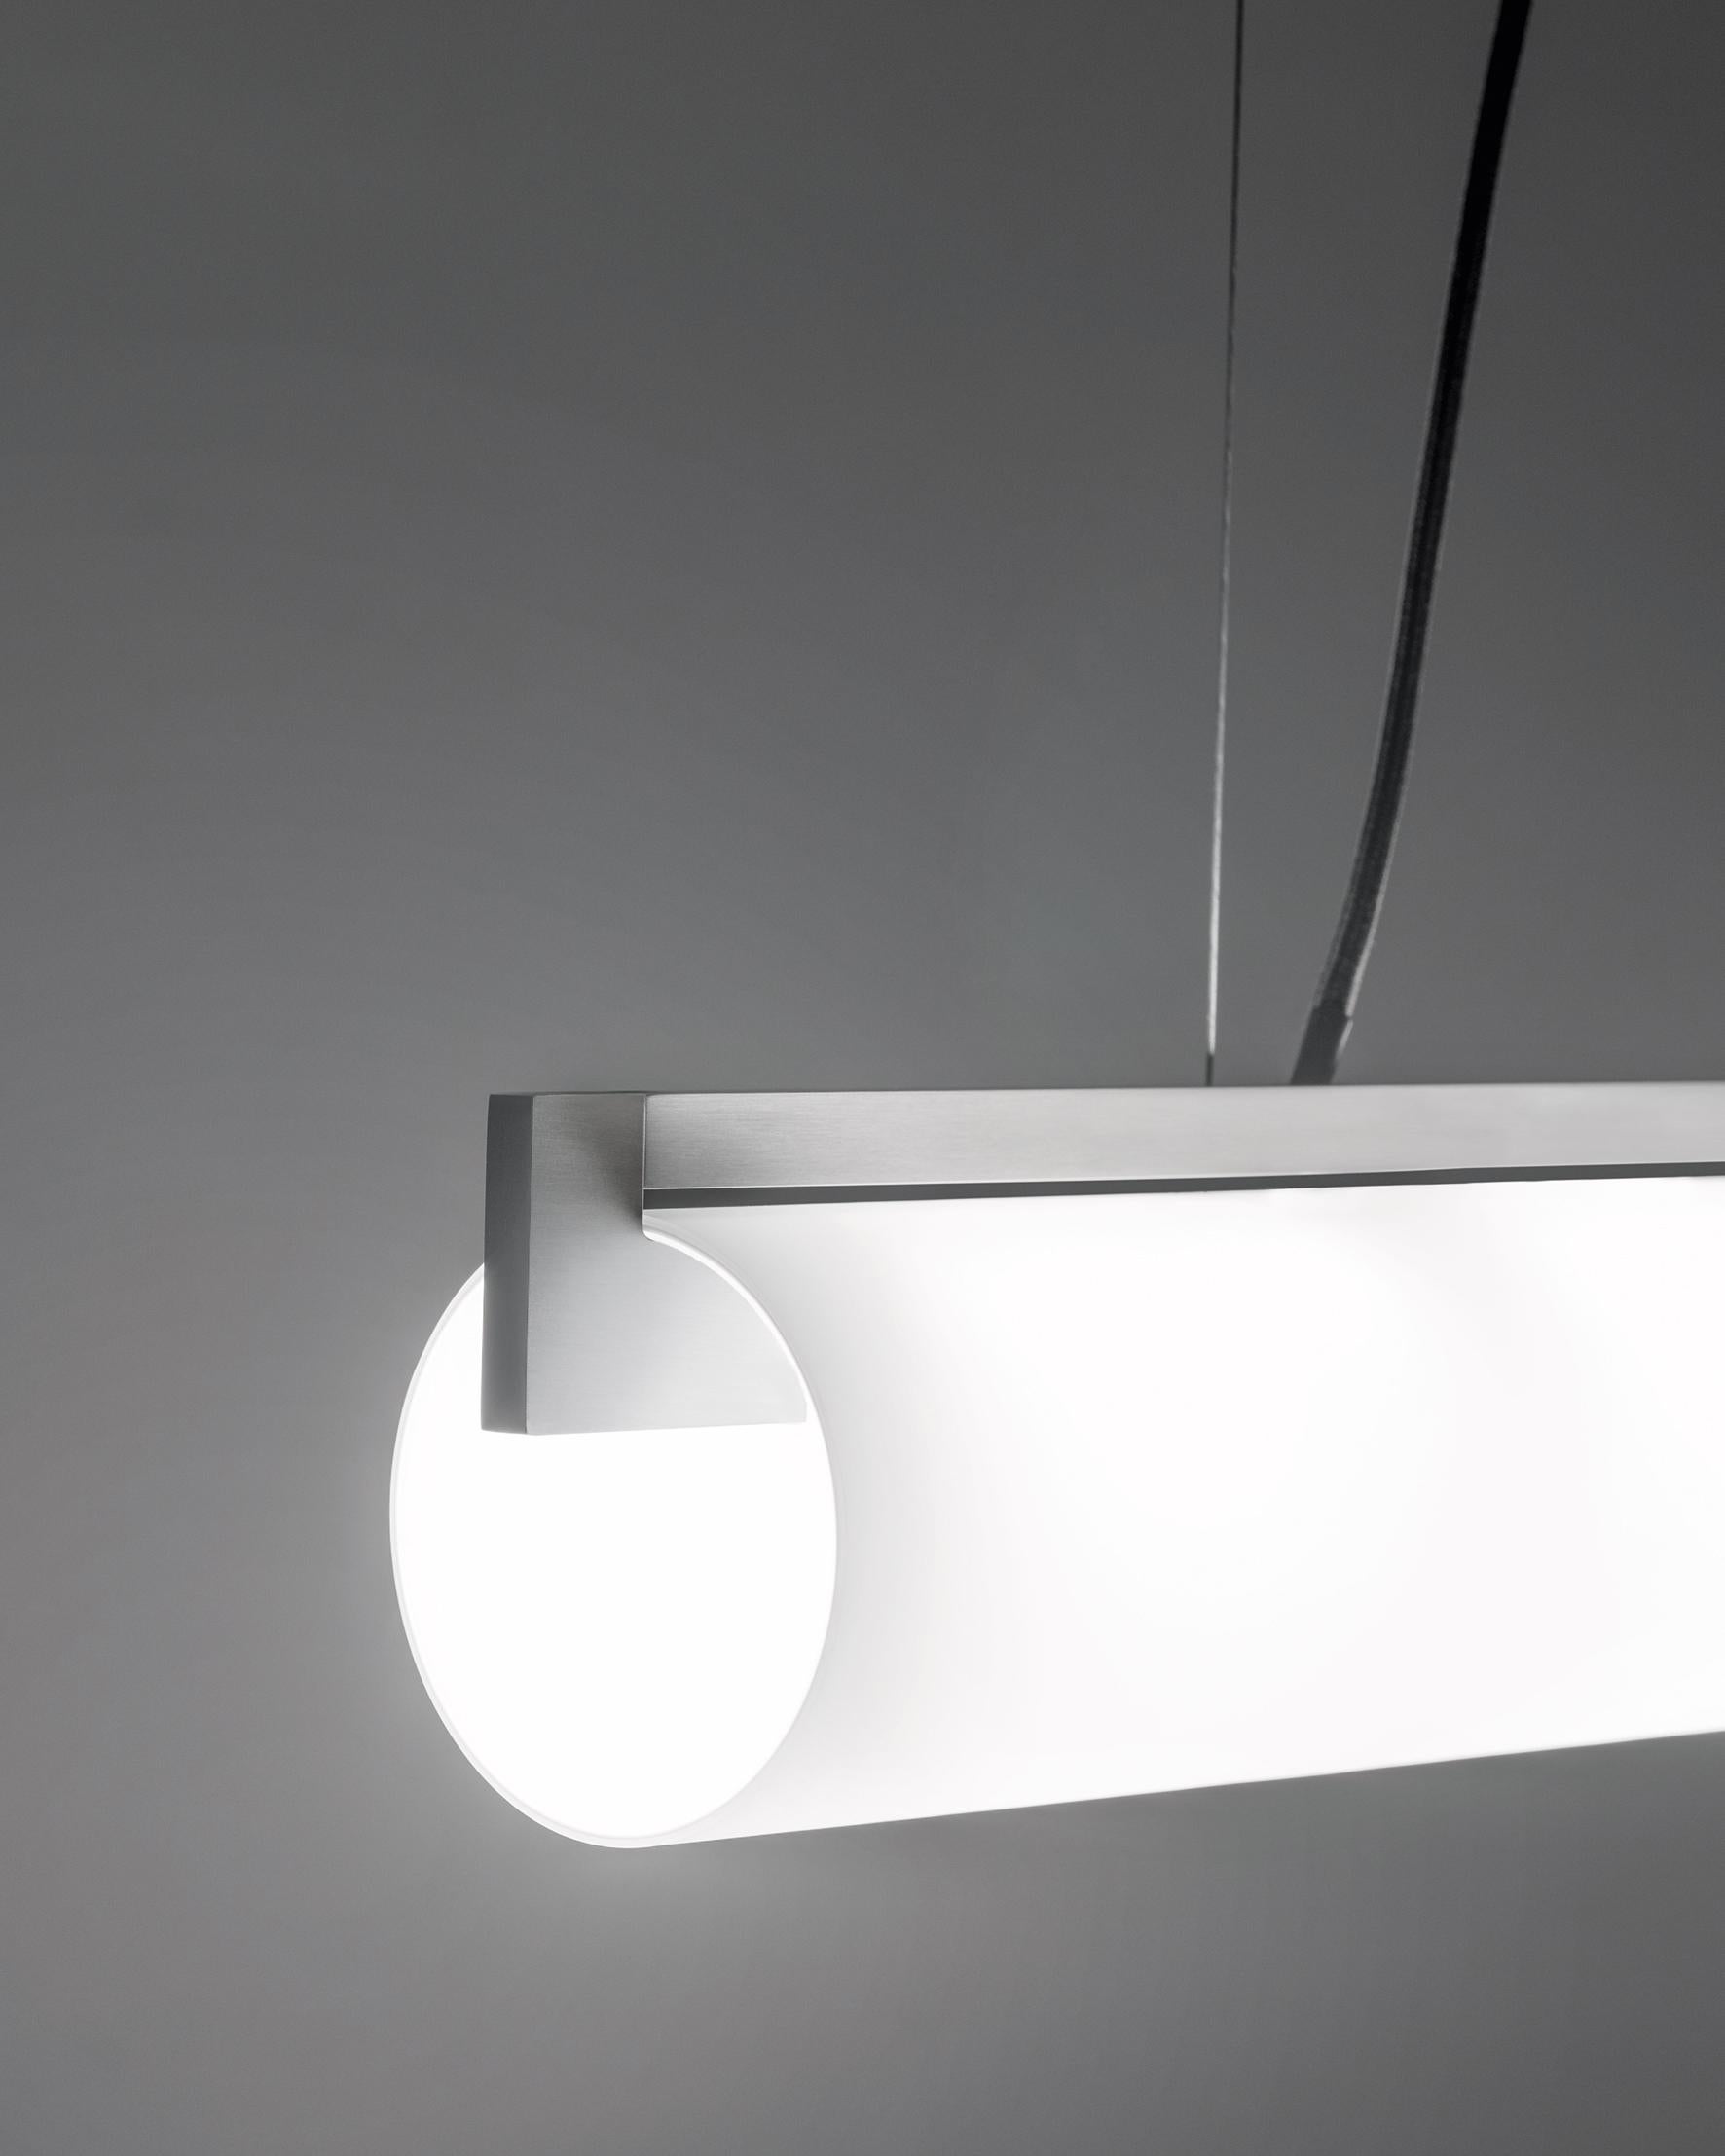 Please note that VAT is not included in the price.

Lighting system composed of pendant and wall version, realized with the combination of the smoothness of a hand blown, satin glass and the stiffness of the aluminium bars. The two bars host 2 10W